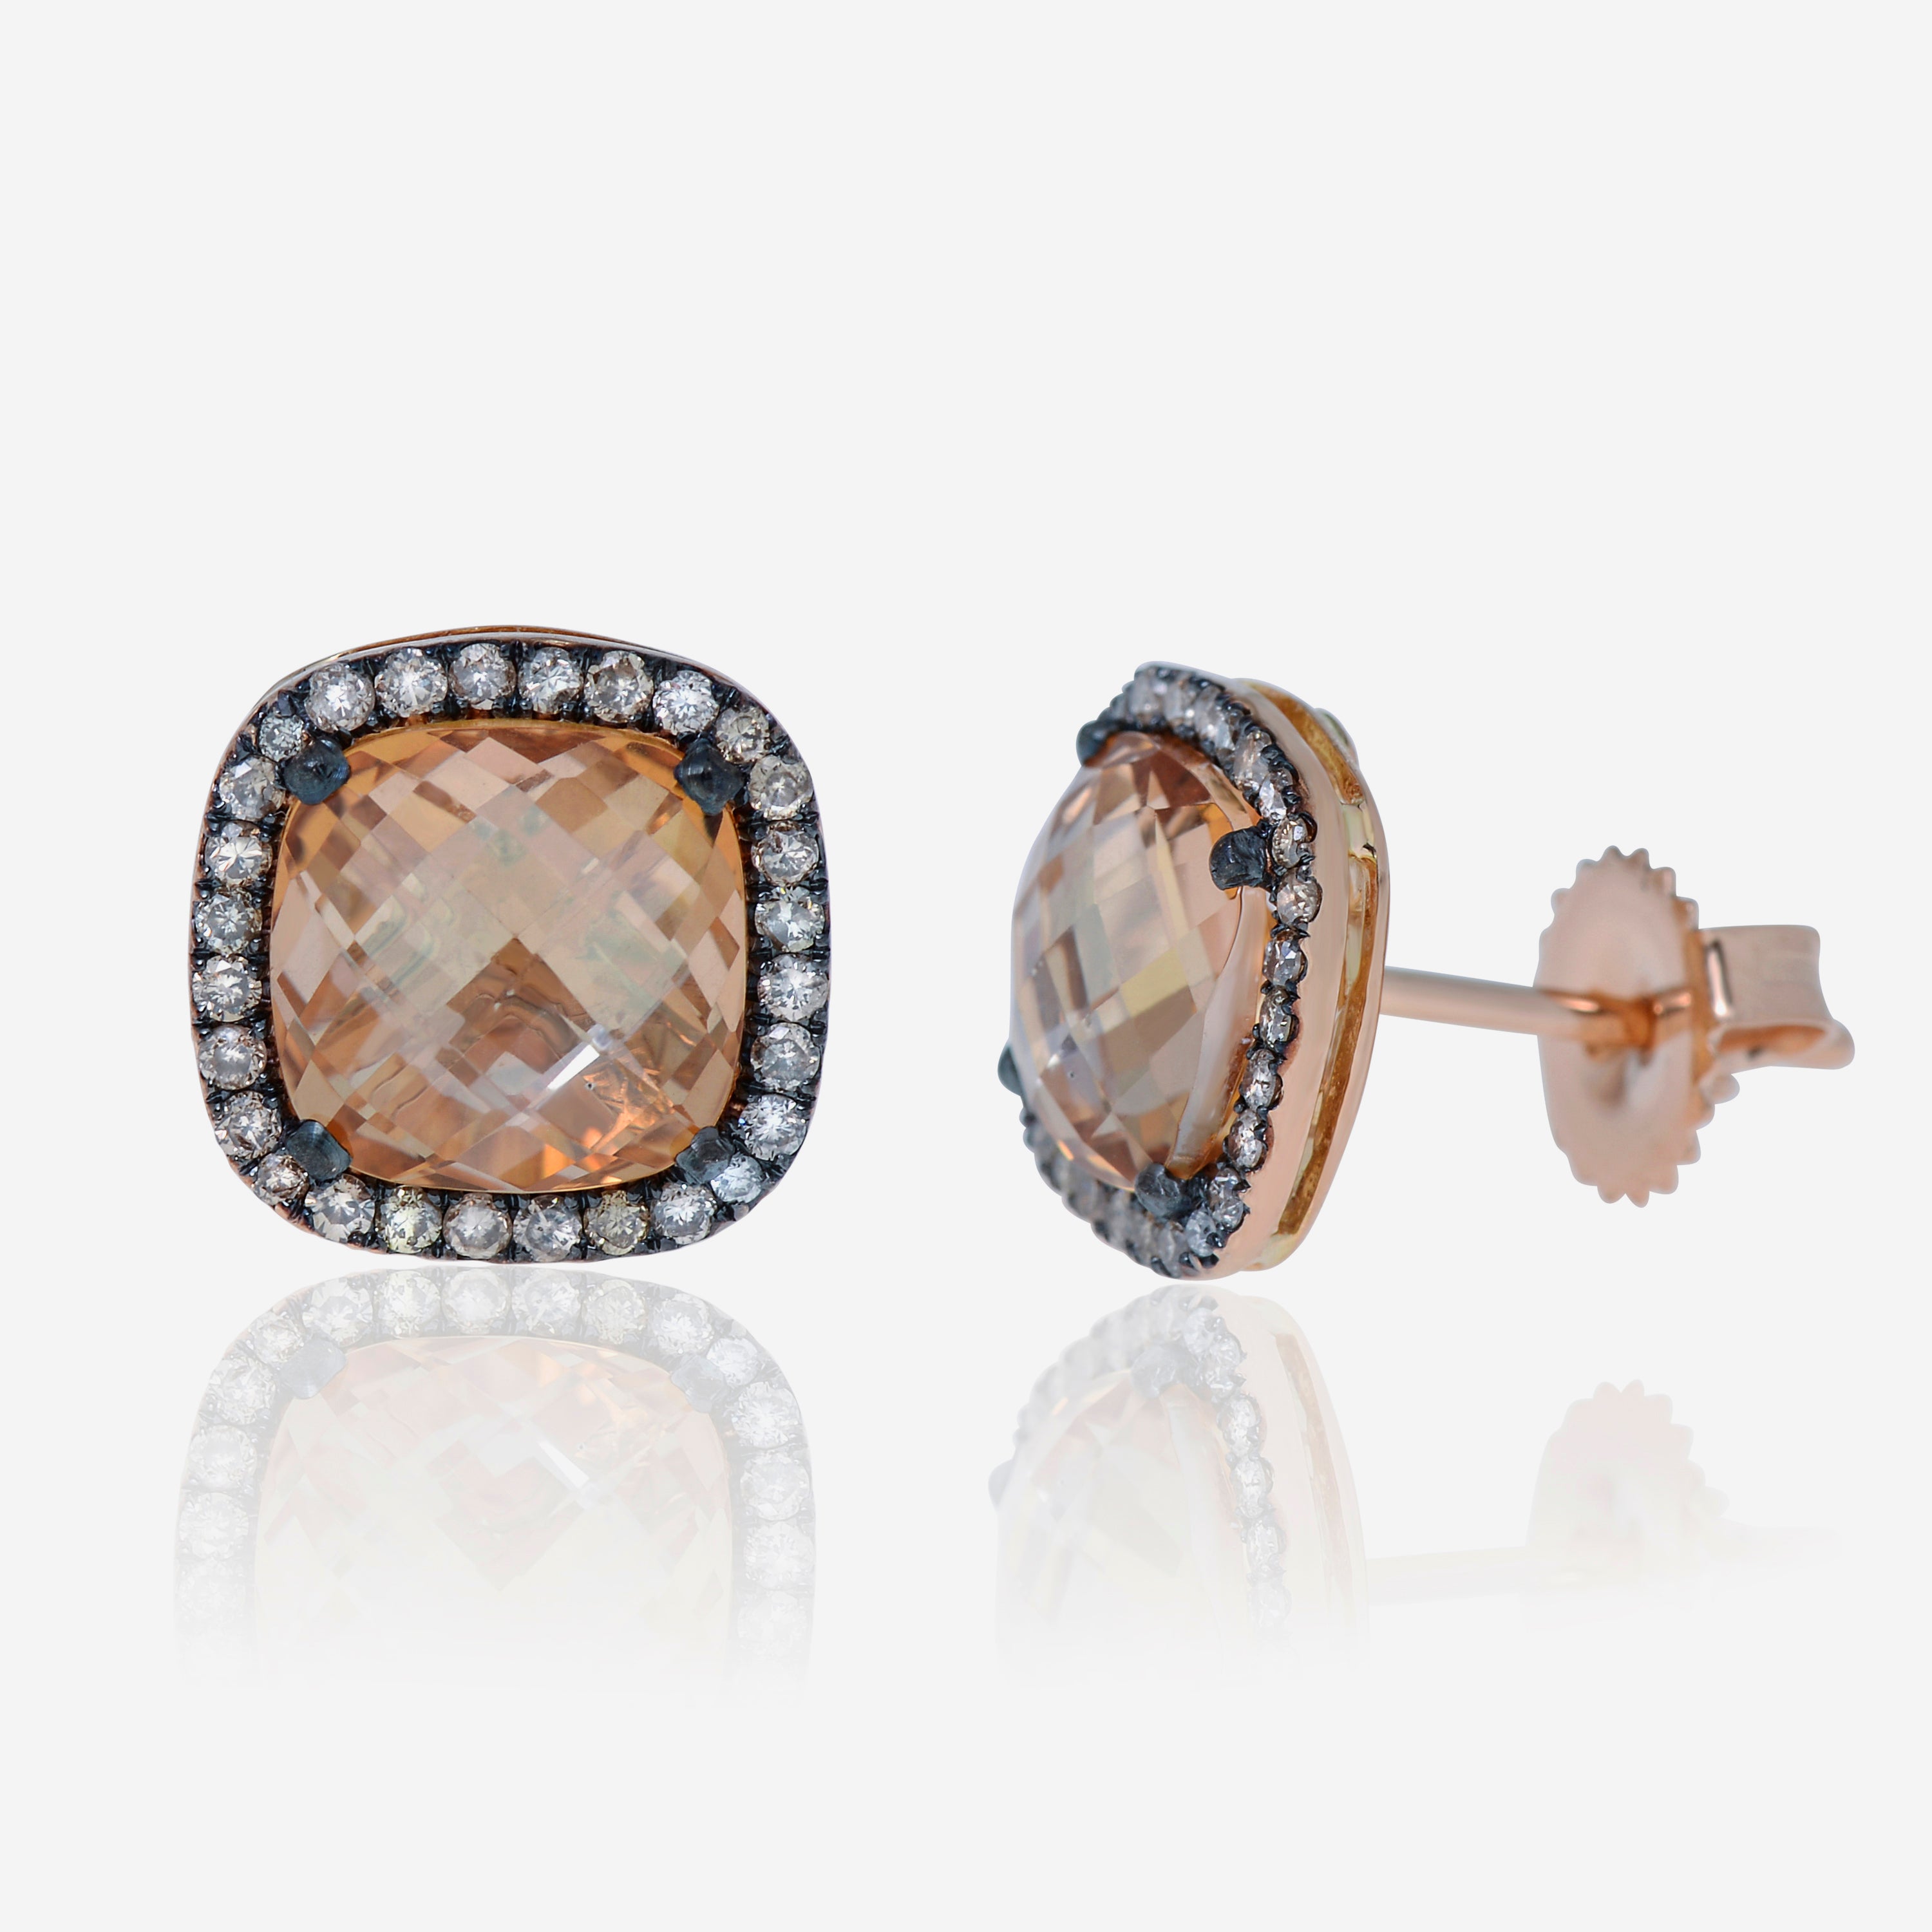 Suzanne Kalan 18K Rose Gold, Champagne Topaz and Diamond Stud Earrings - THE SOLIST